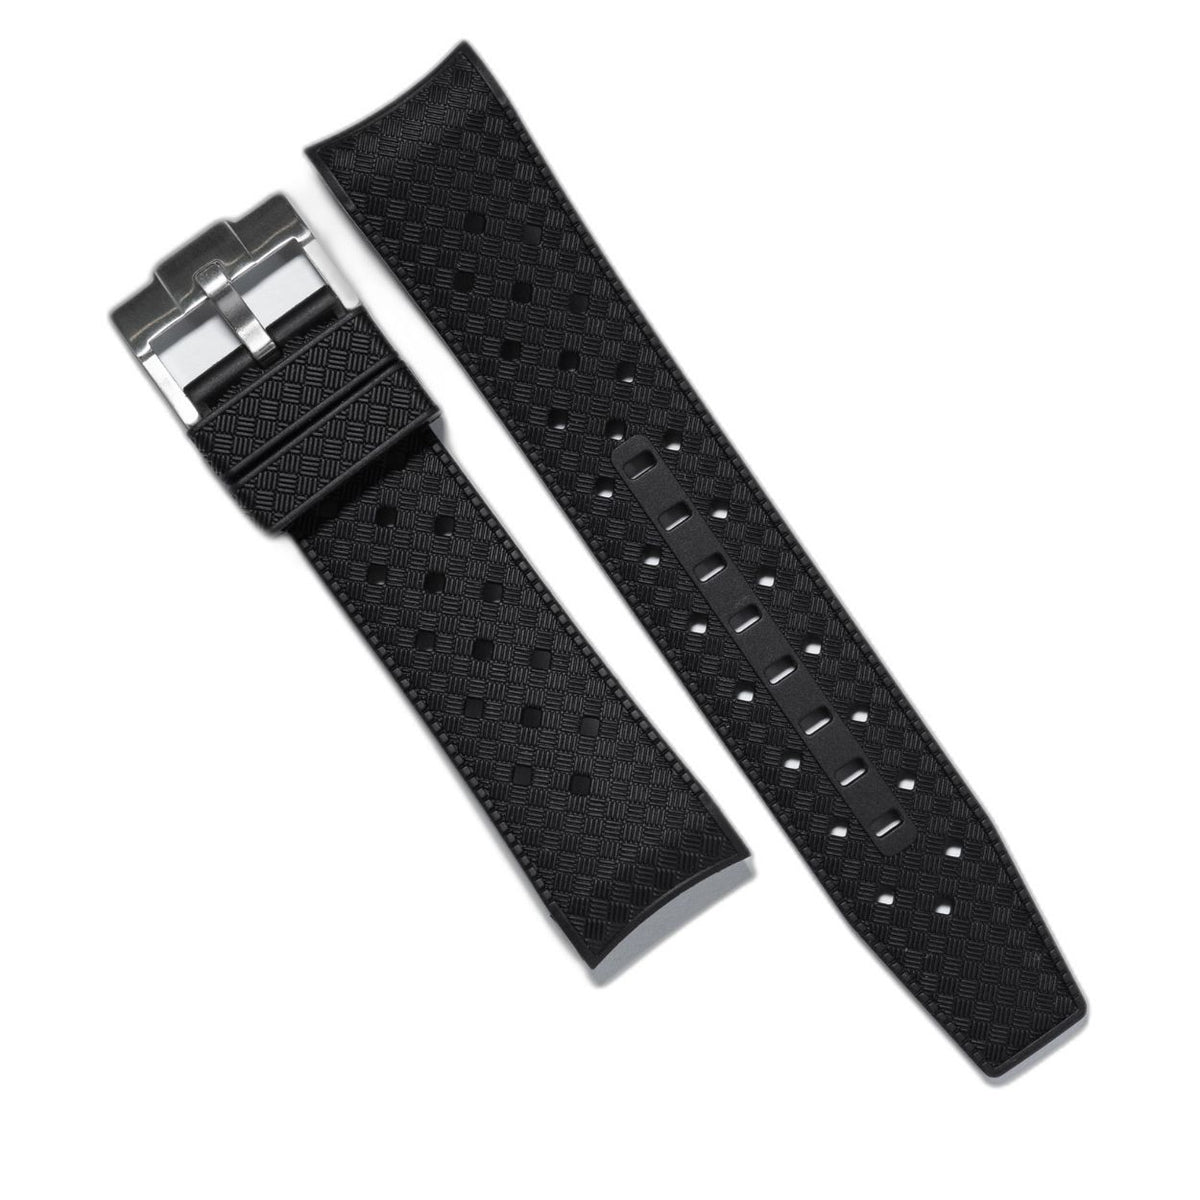 Tropic Curved End Rubber Strap for Blancpain x Swatch Scuba Fifty Fathoms in Black - Nomad Watch Works MY